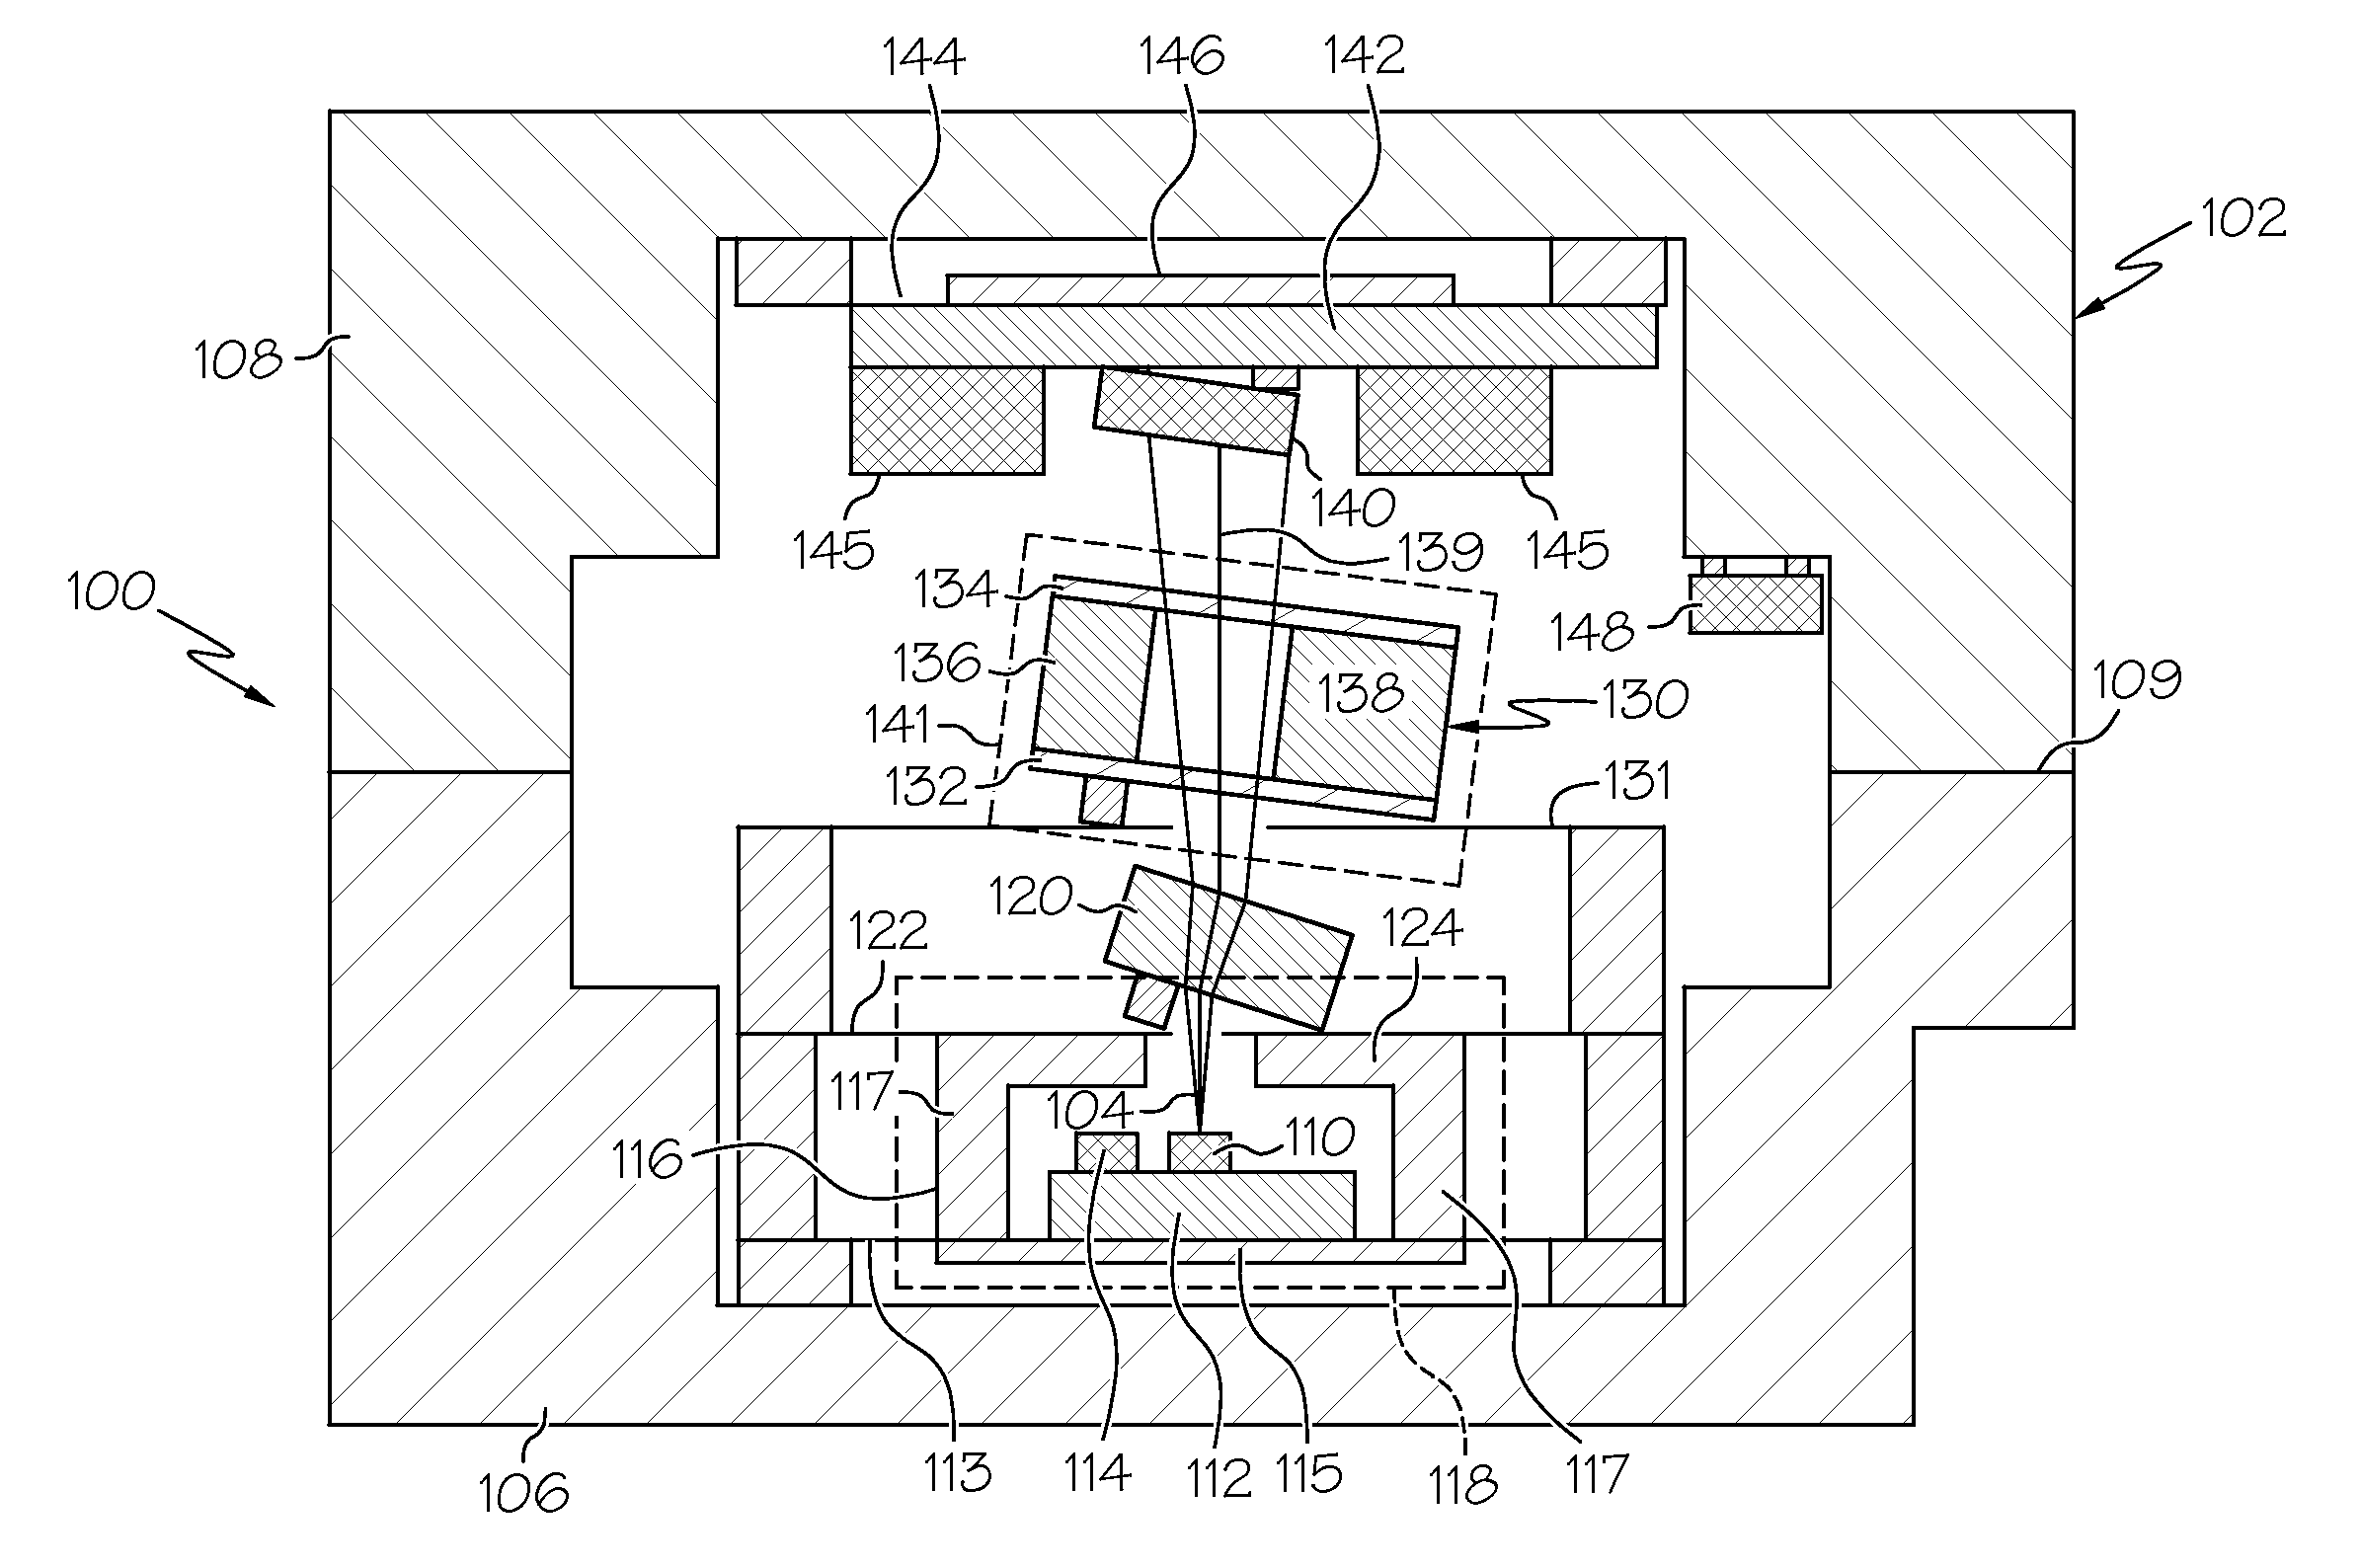 Chip-scale atomic clock with two thermal zones